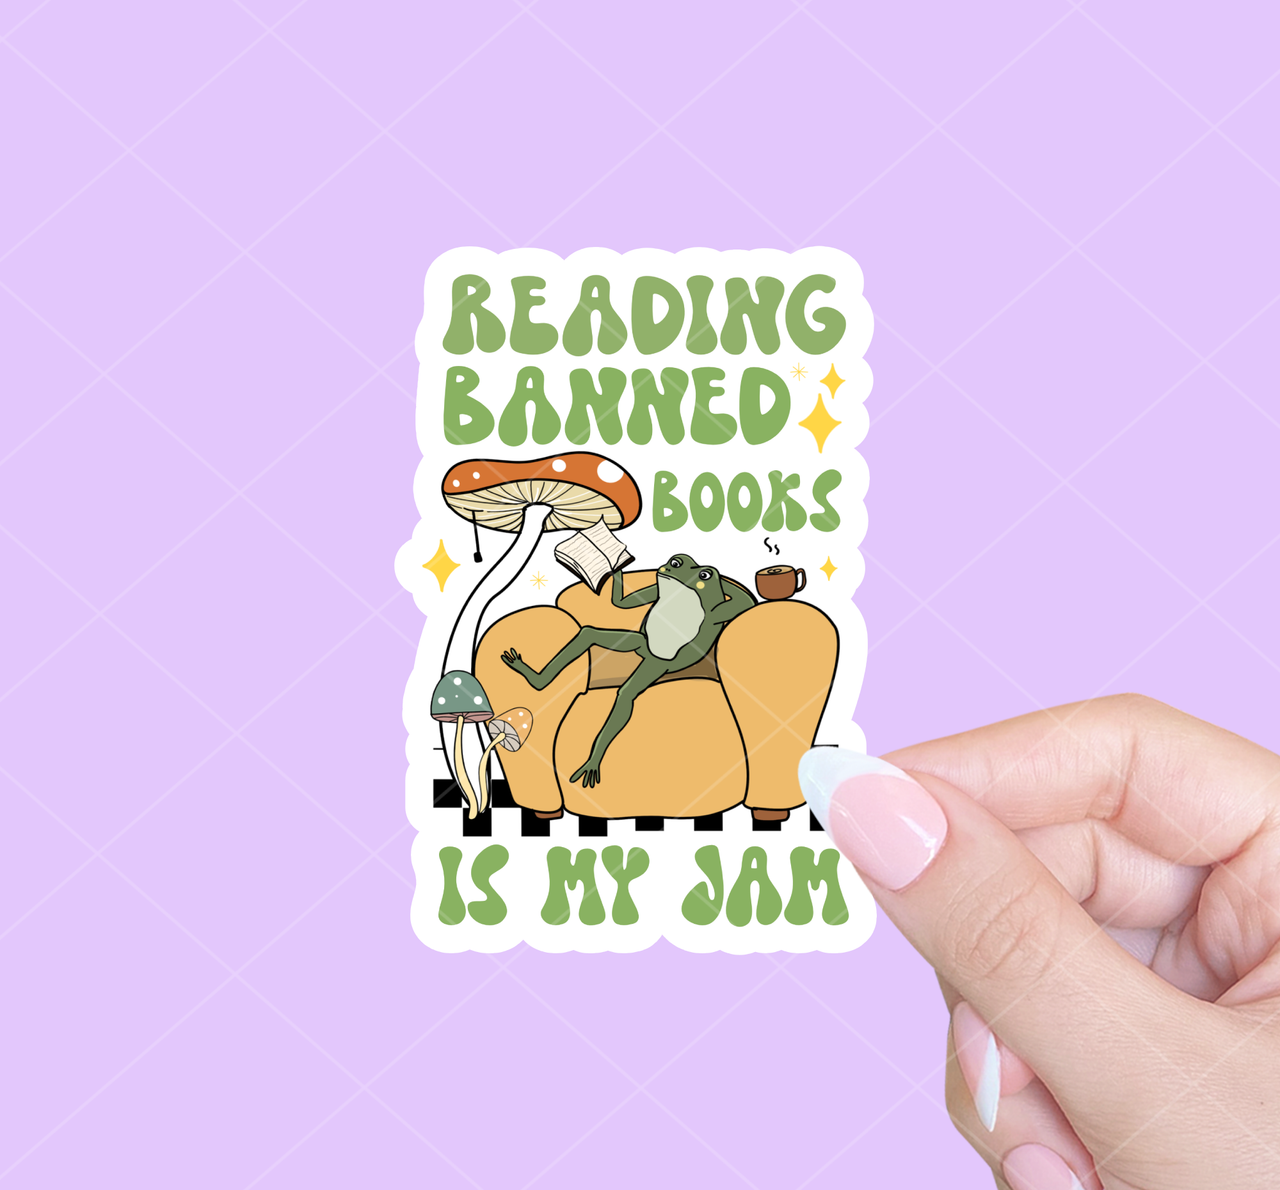 Reading banned books is my jam